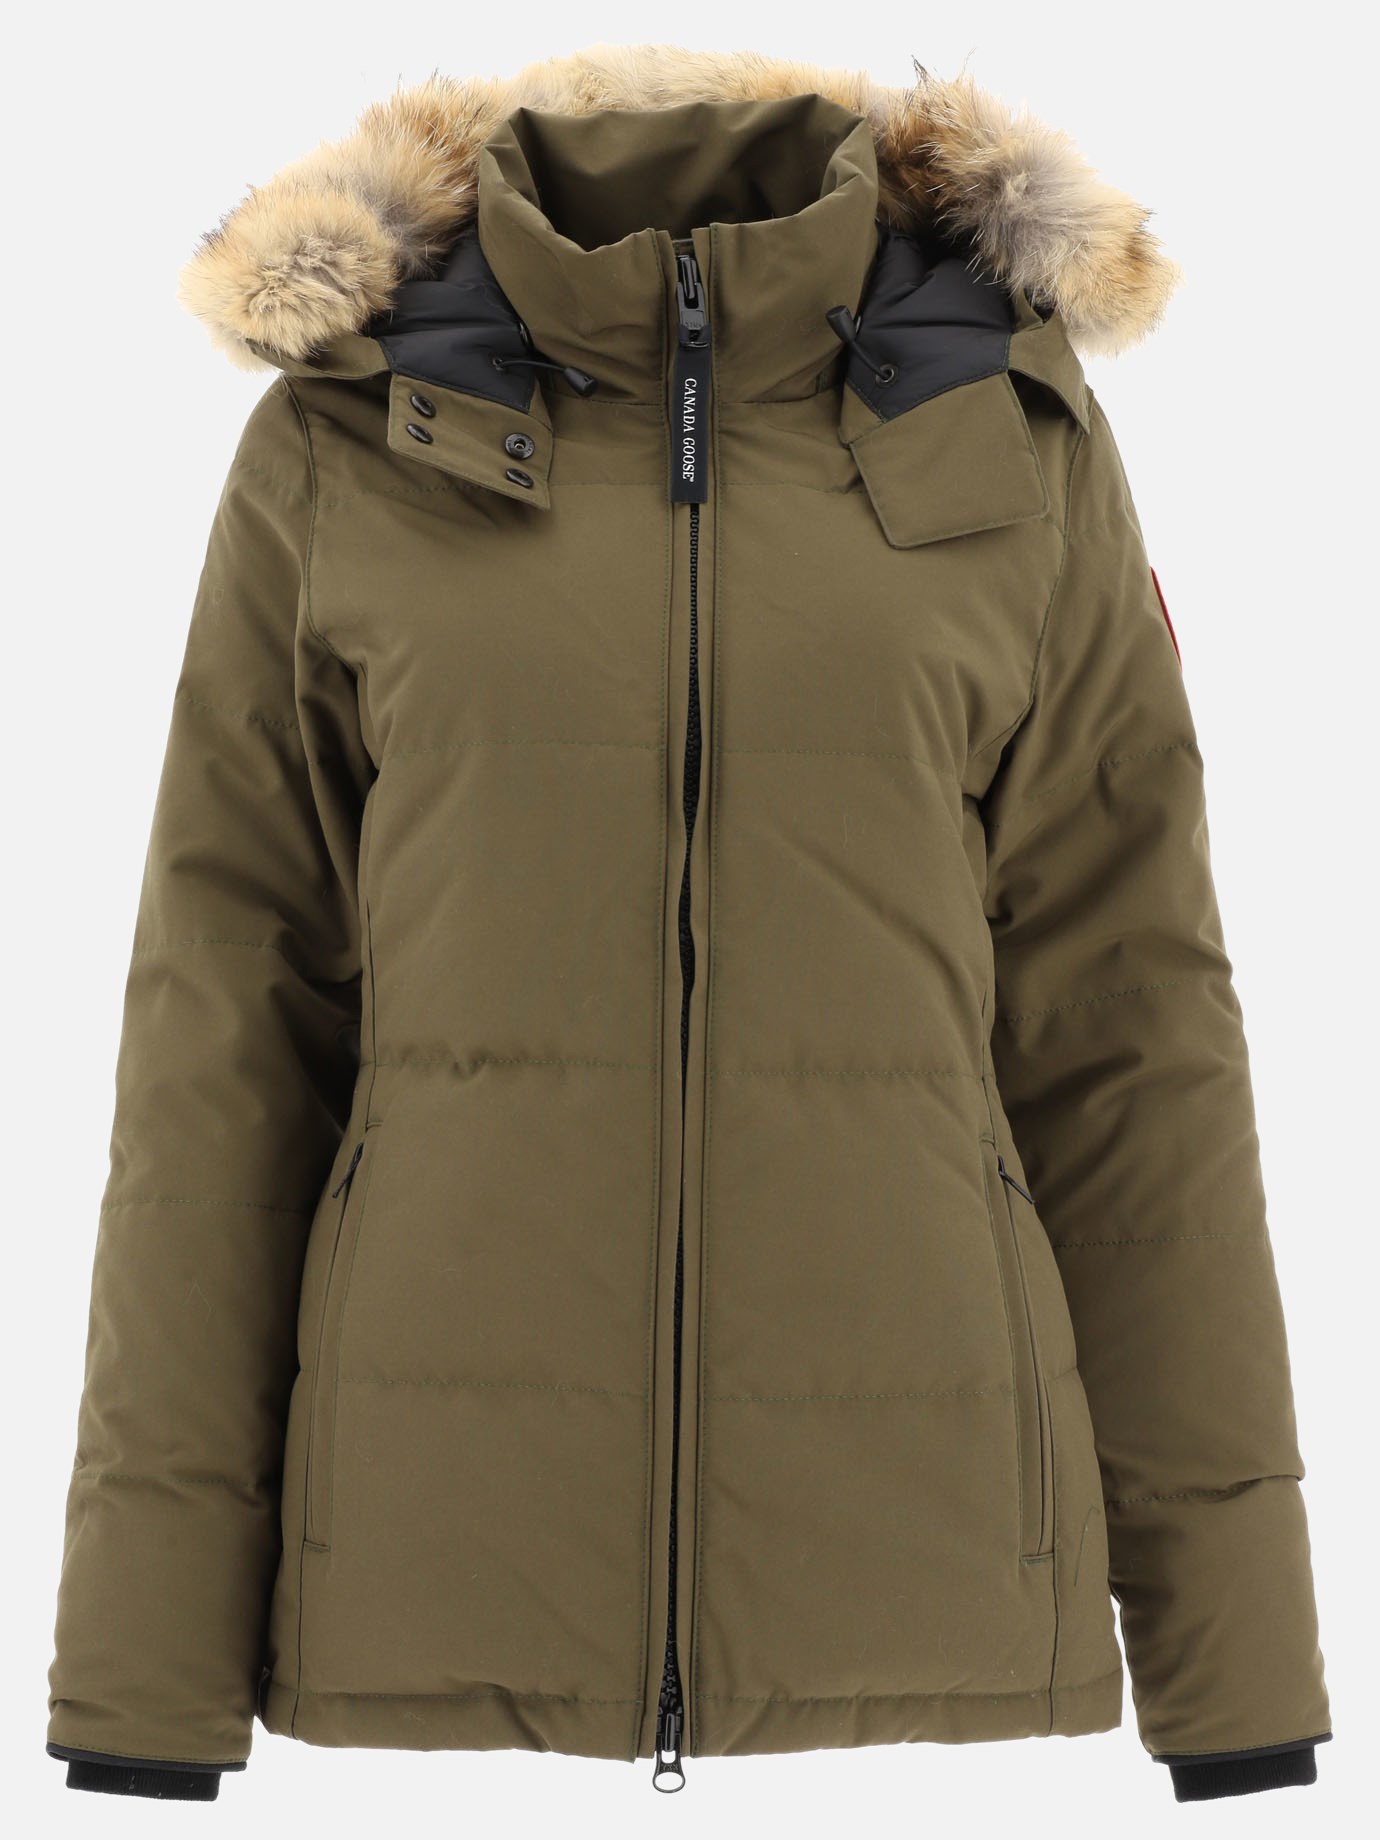  Chelsea  down jacketby Canada Goose - 2